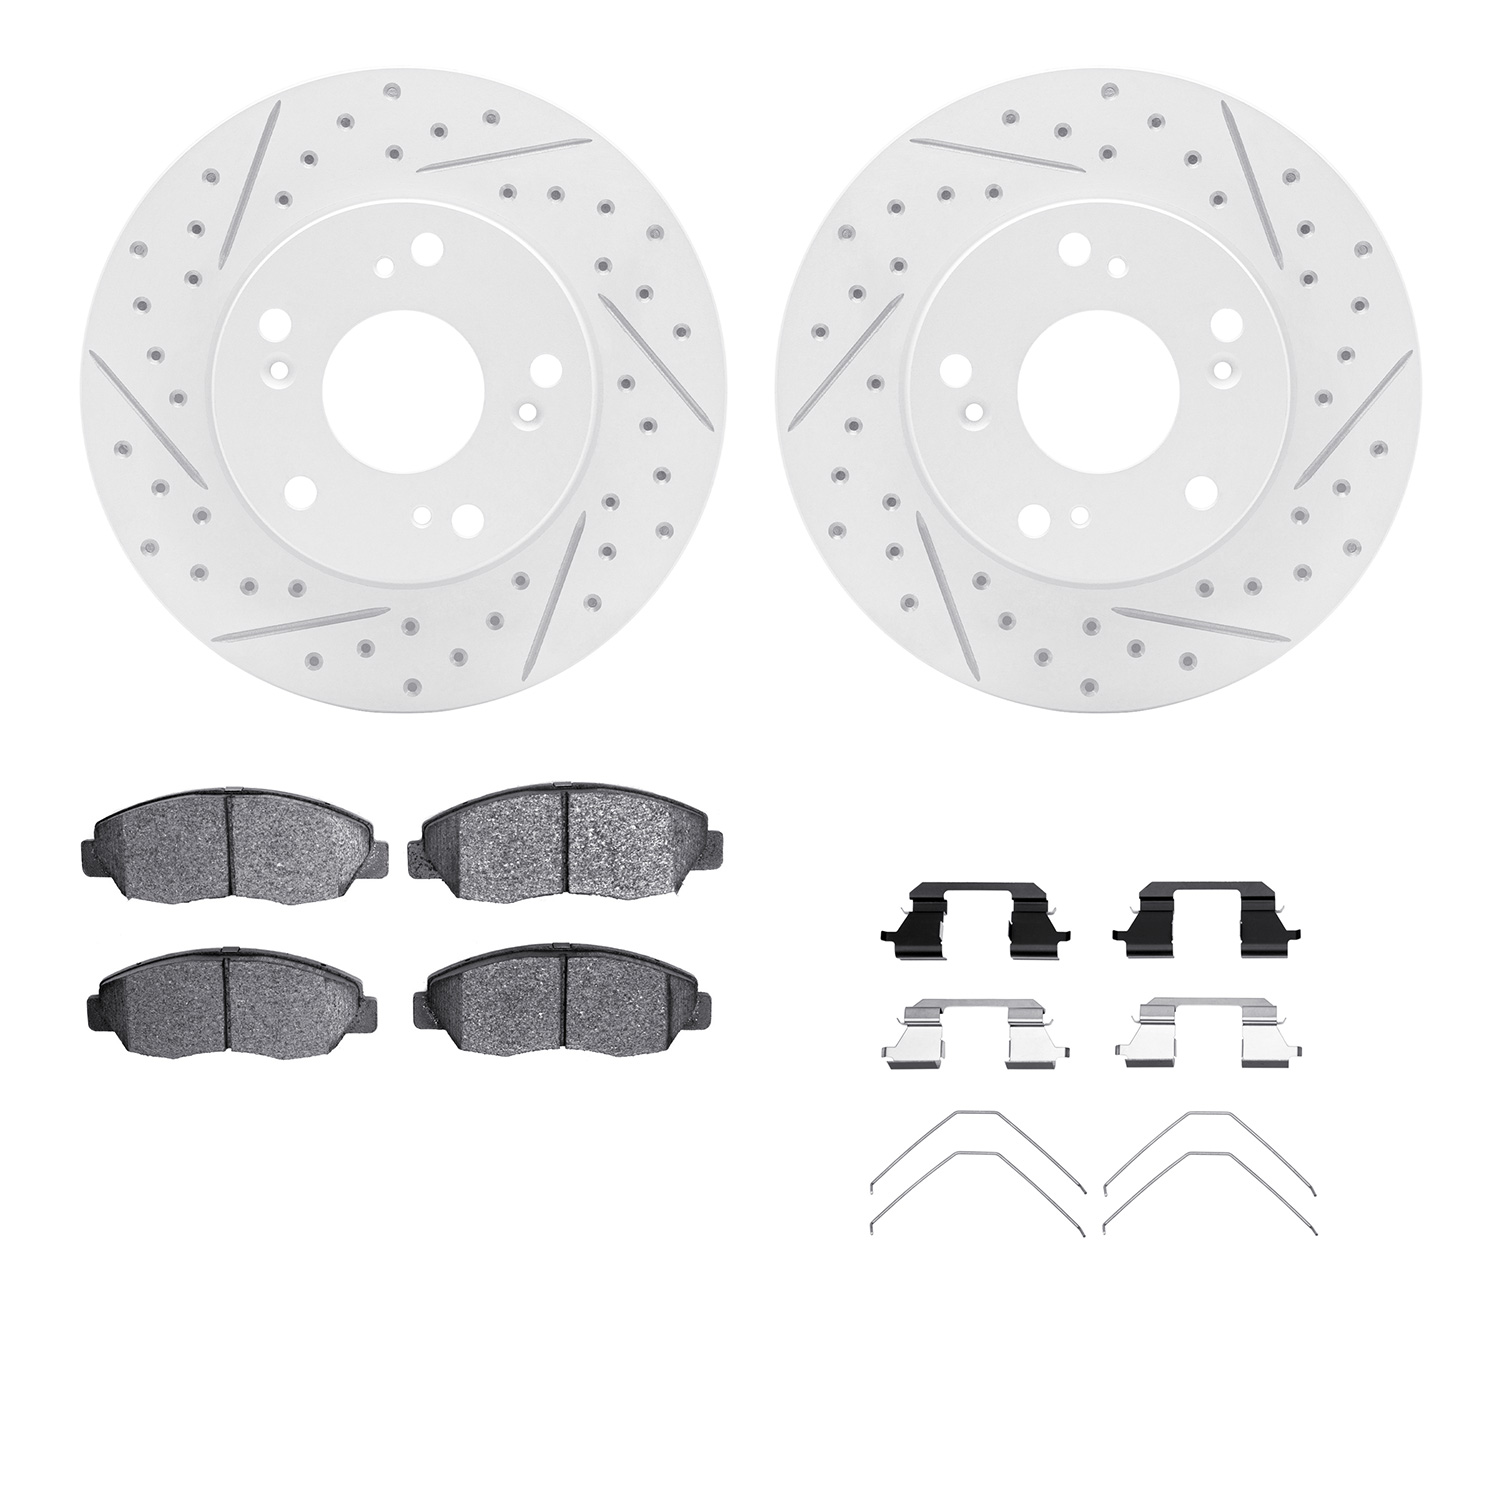 2512-59031 Geoperformance Drilled/Slotted Rotors w/5000 Advanced Brake Pads Kit & Hardware, 2006-2011 Acura/Honda, Position: Fro